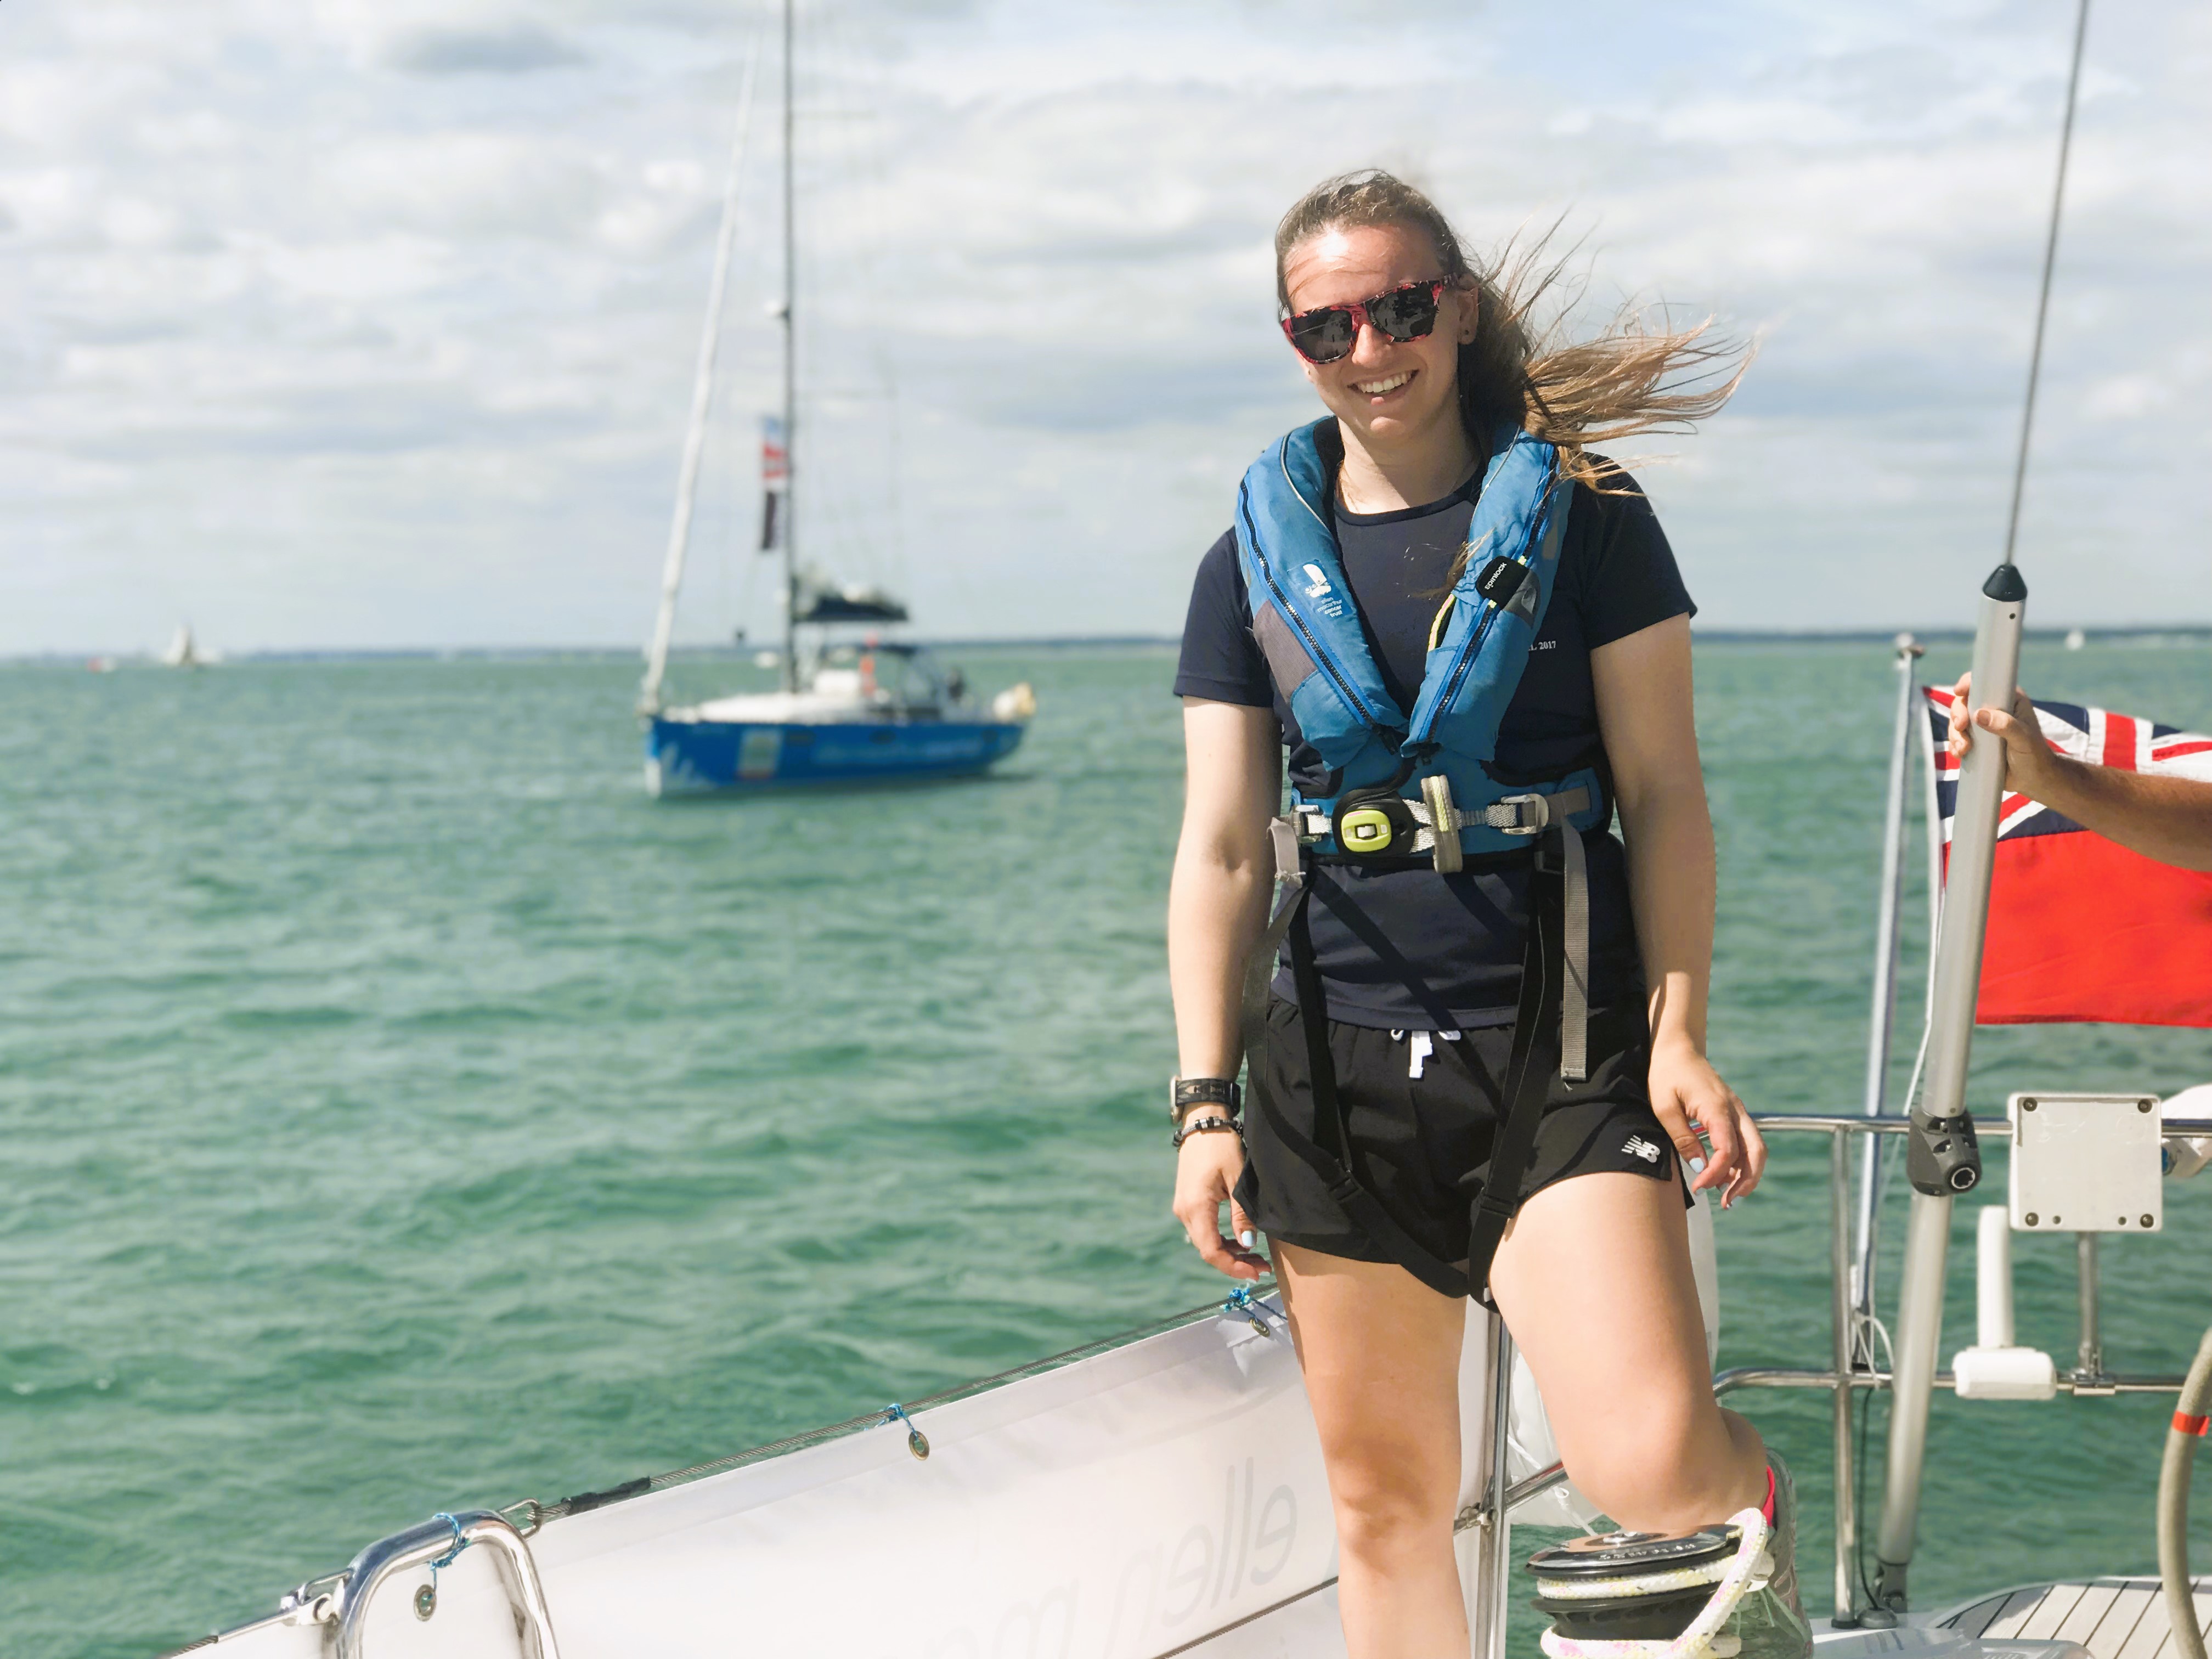 Lucie standing on deck during a sailing adventure with the Trust on a sunny day, smiling at the camera with sunglasses on